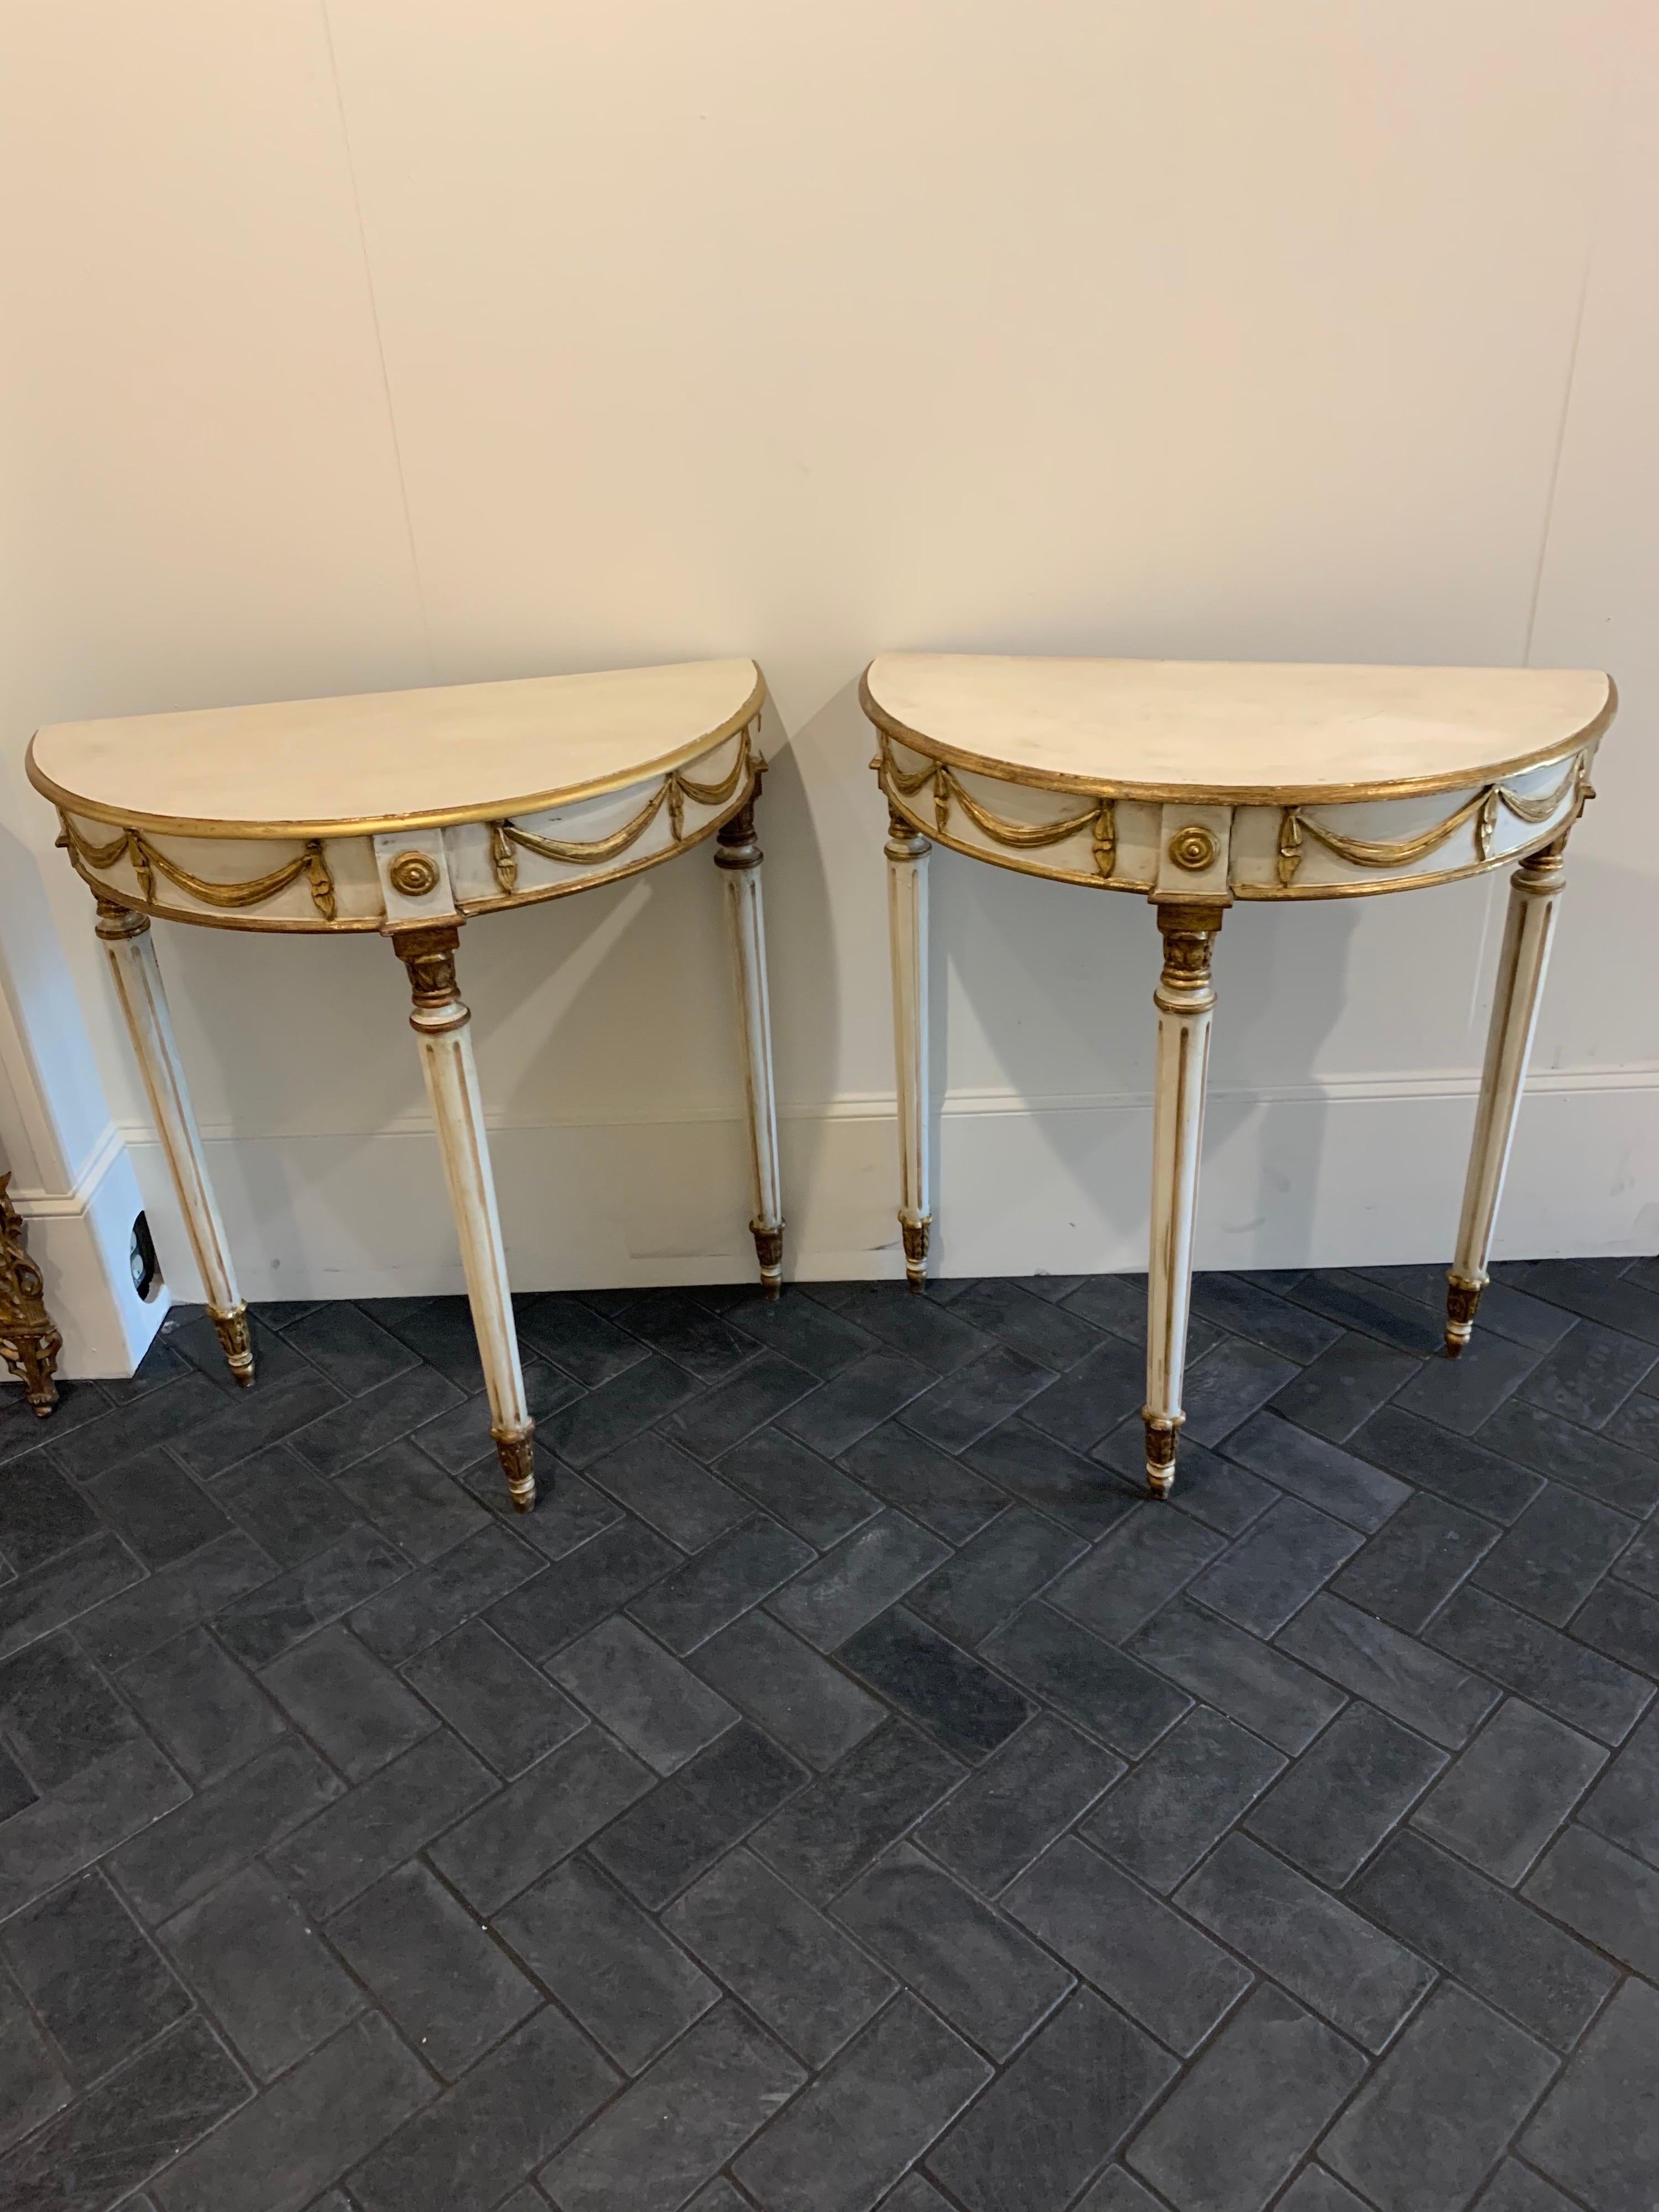 Lovely pair of early 20th century Louis XVI style parcel-gilt side tables. Painted in a creamy white with nicely carved gold gilt details. This pair creates a very Classic look and is great for a smaller spaces. So pretty!